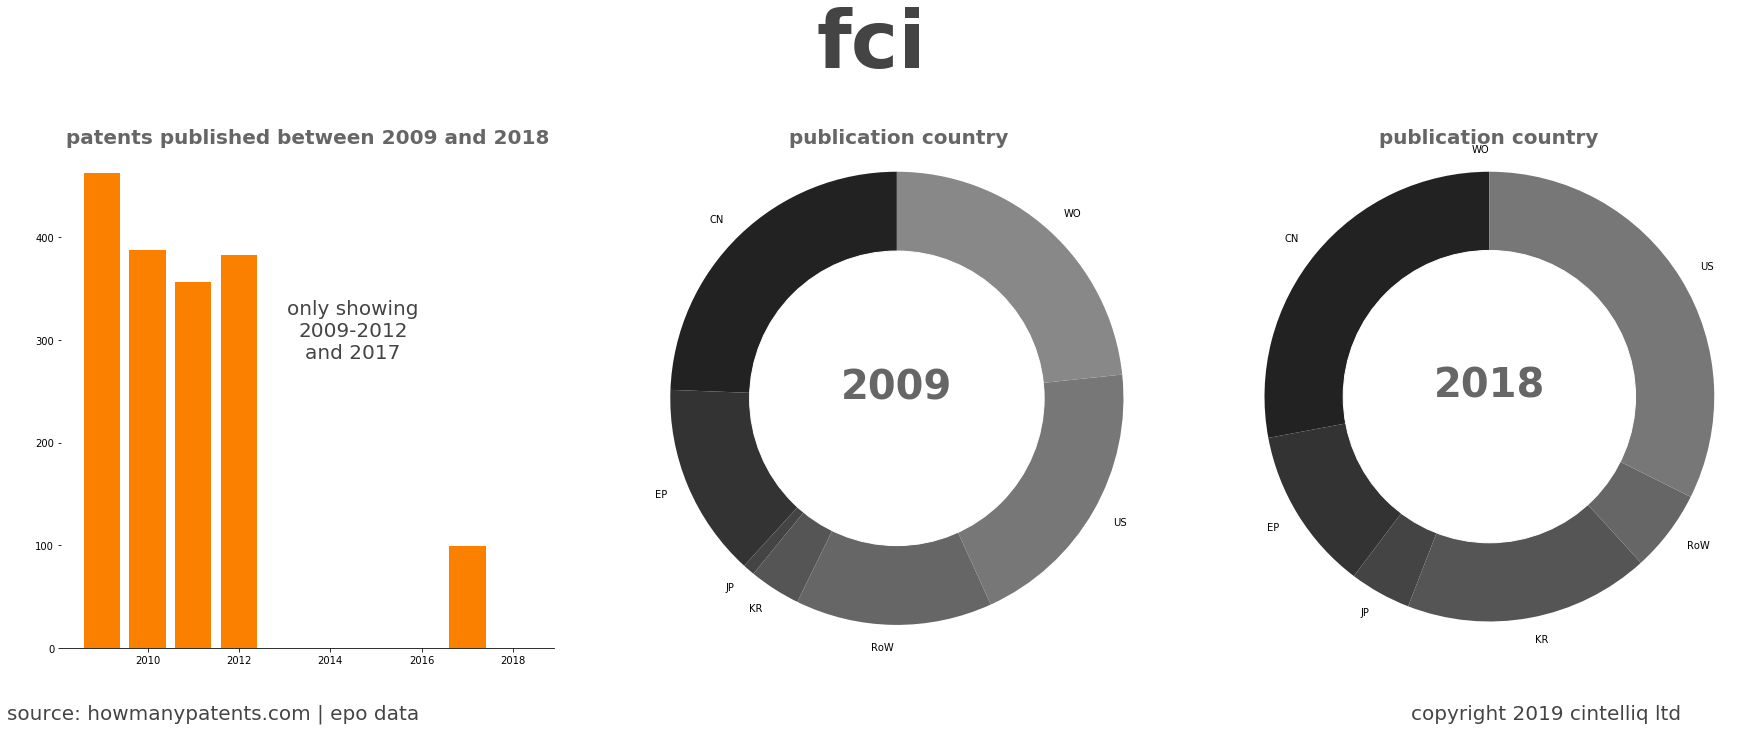 summary of patents for Fci